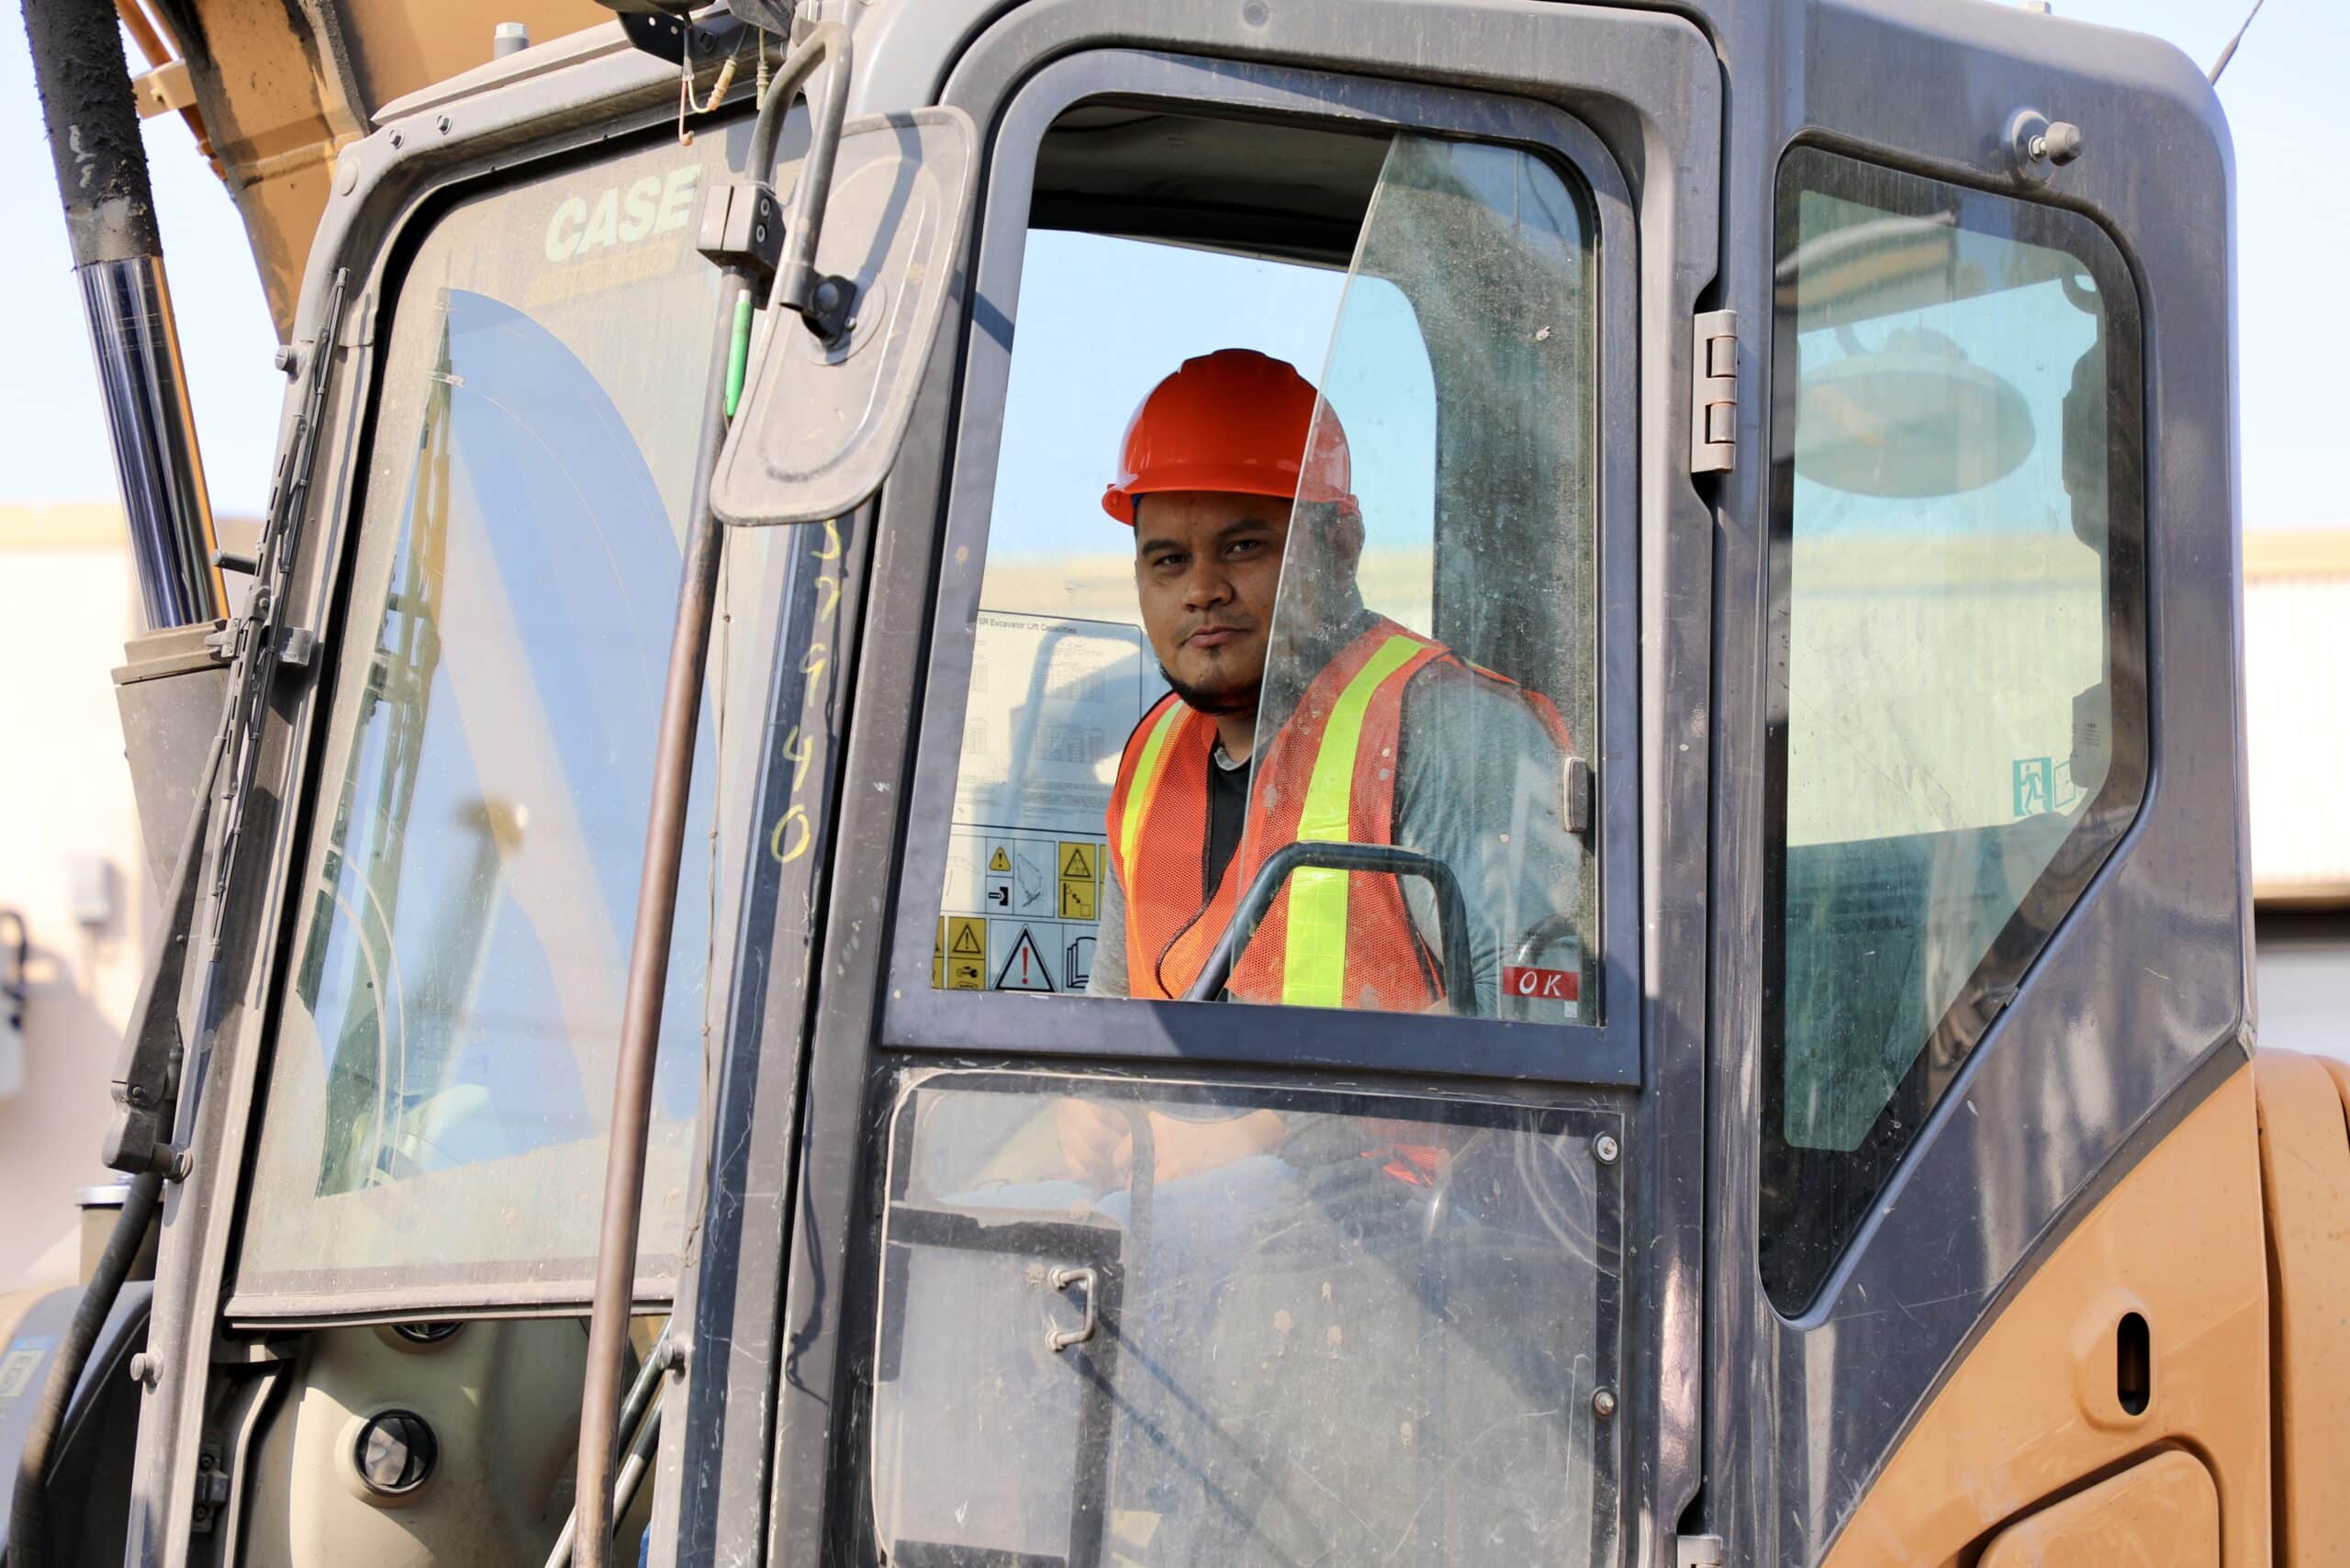 Employee in fork lift with hard hat